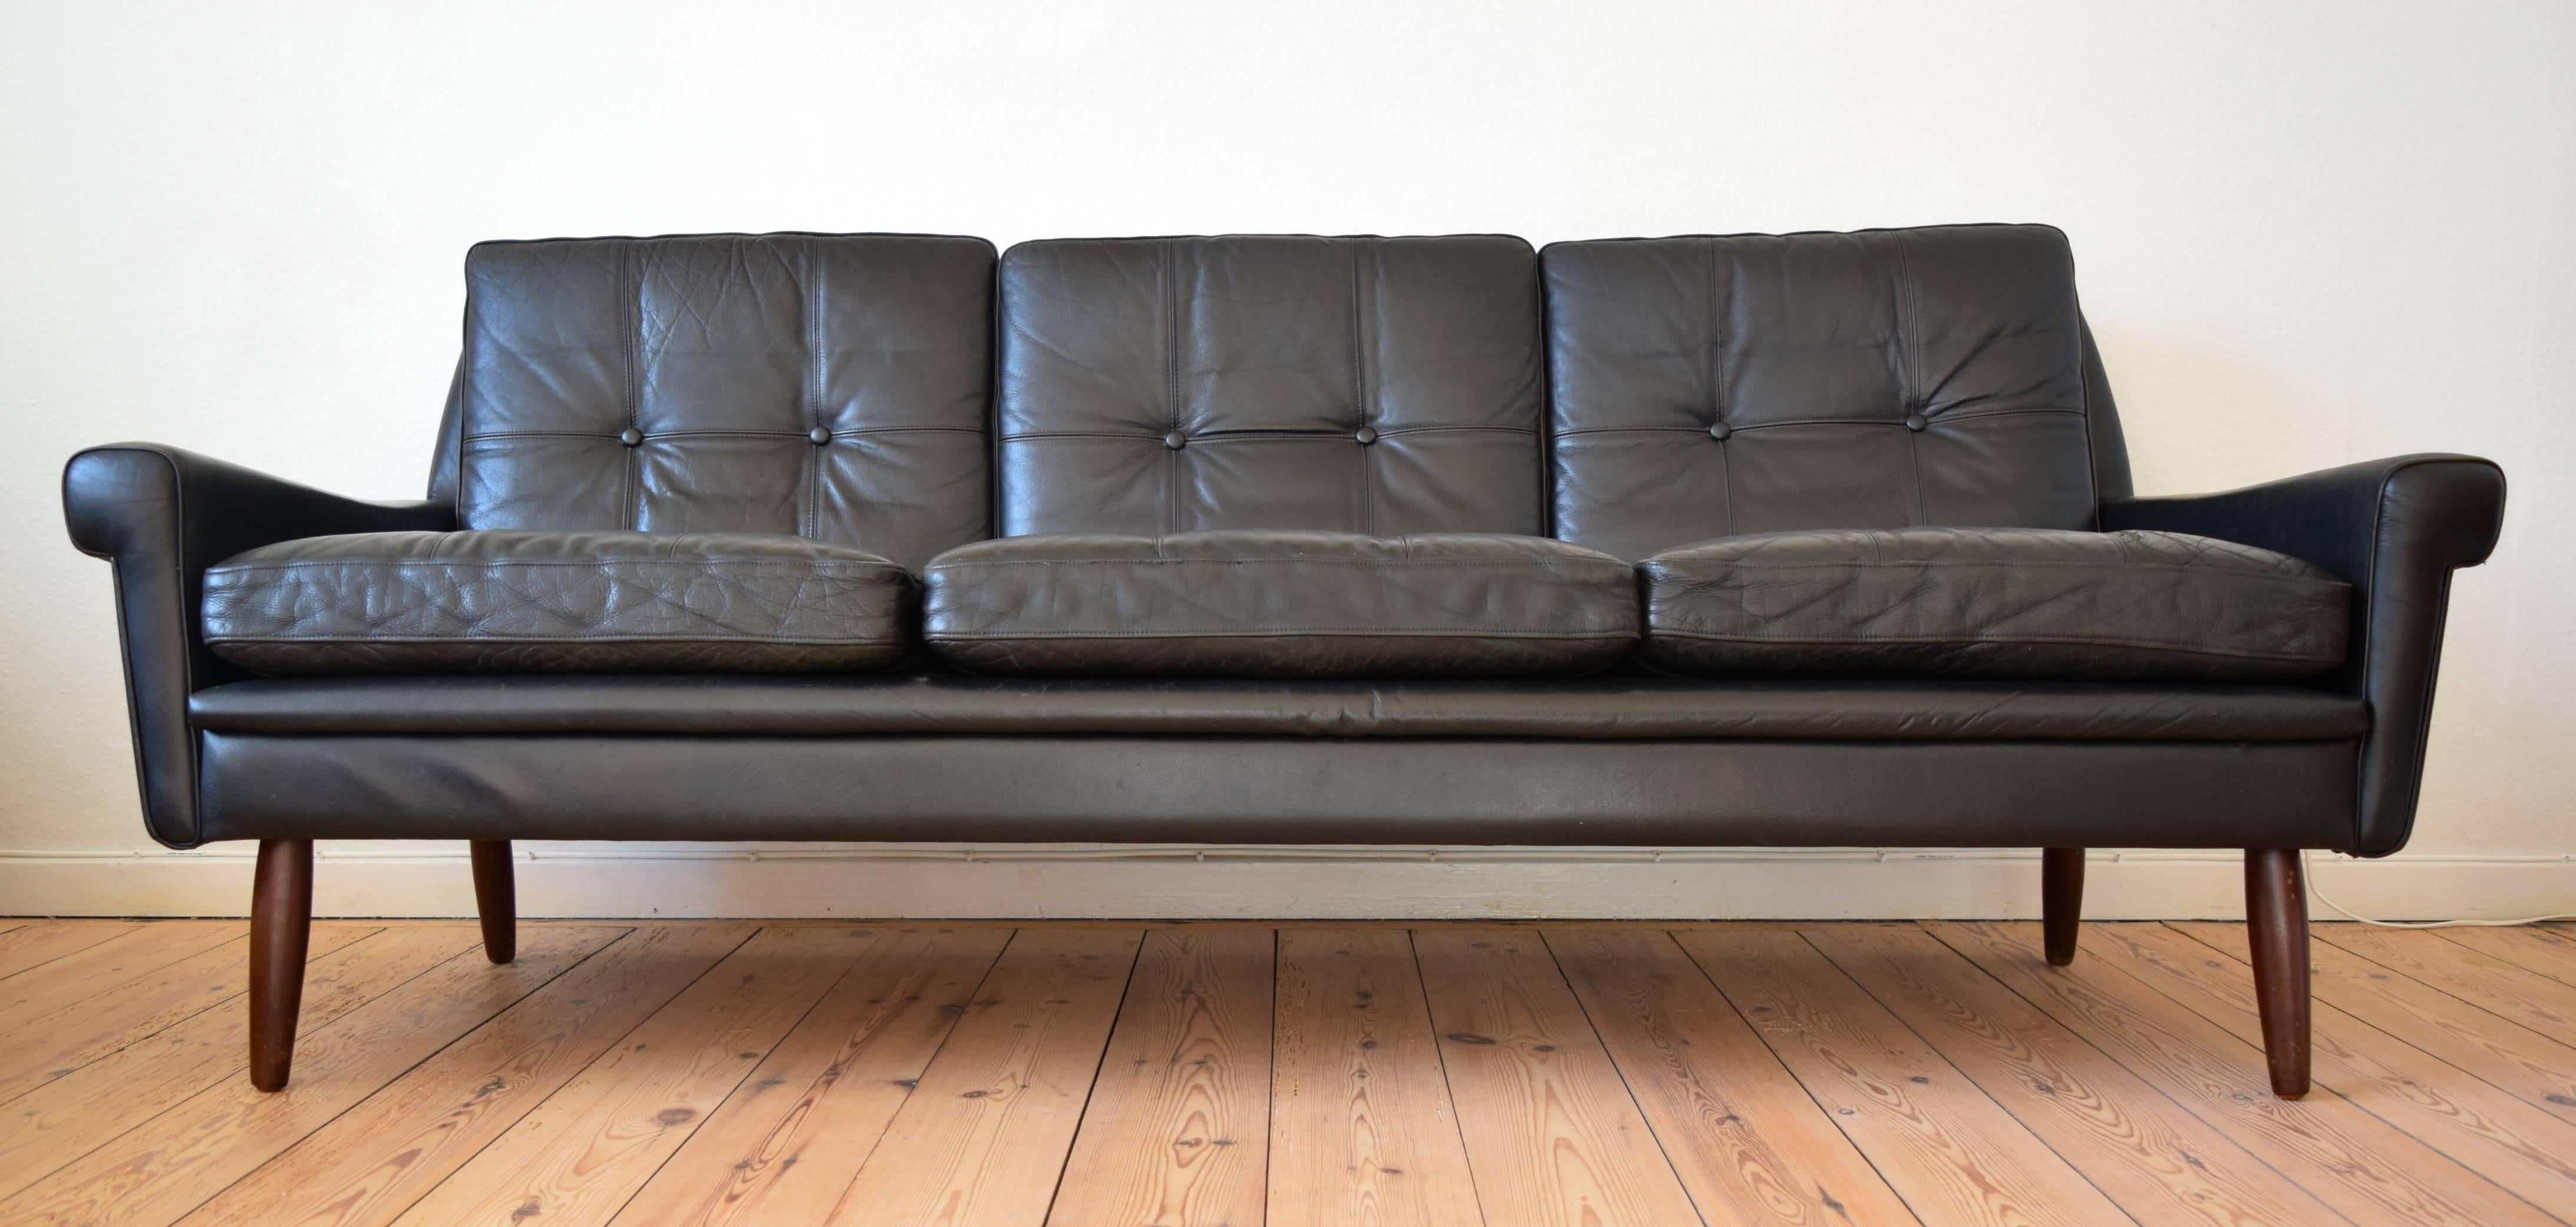 Elegant three-person sofa manufactured in Denmark in the 1960s by Skipper Møbler. Features buttoned cushions which are still firm with just the right amount of patina. Sits on turned teak legs.